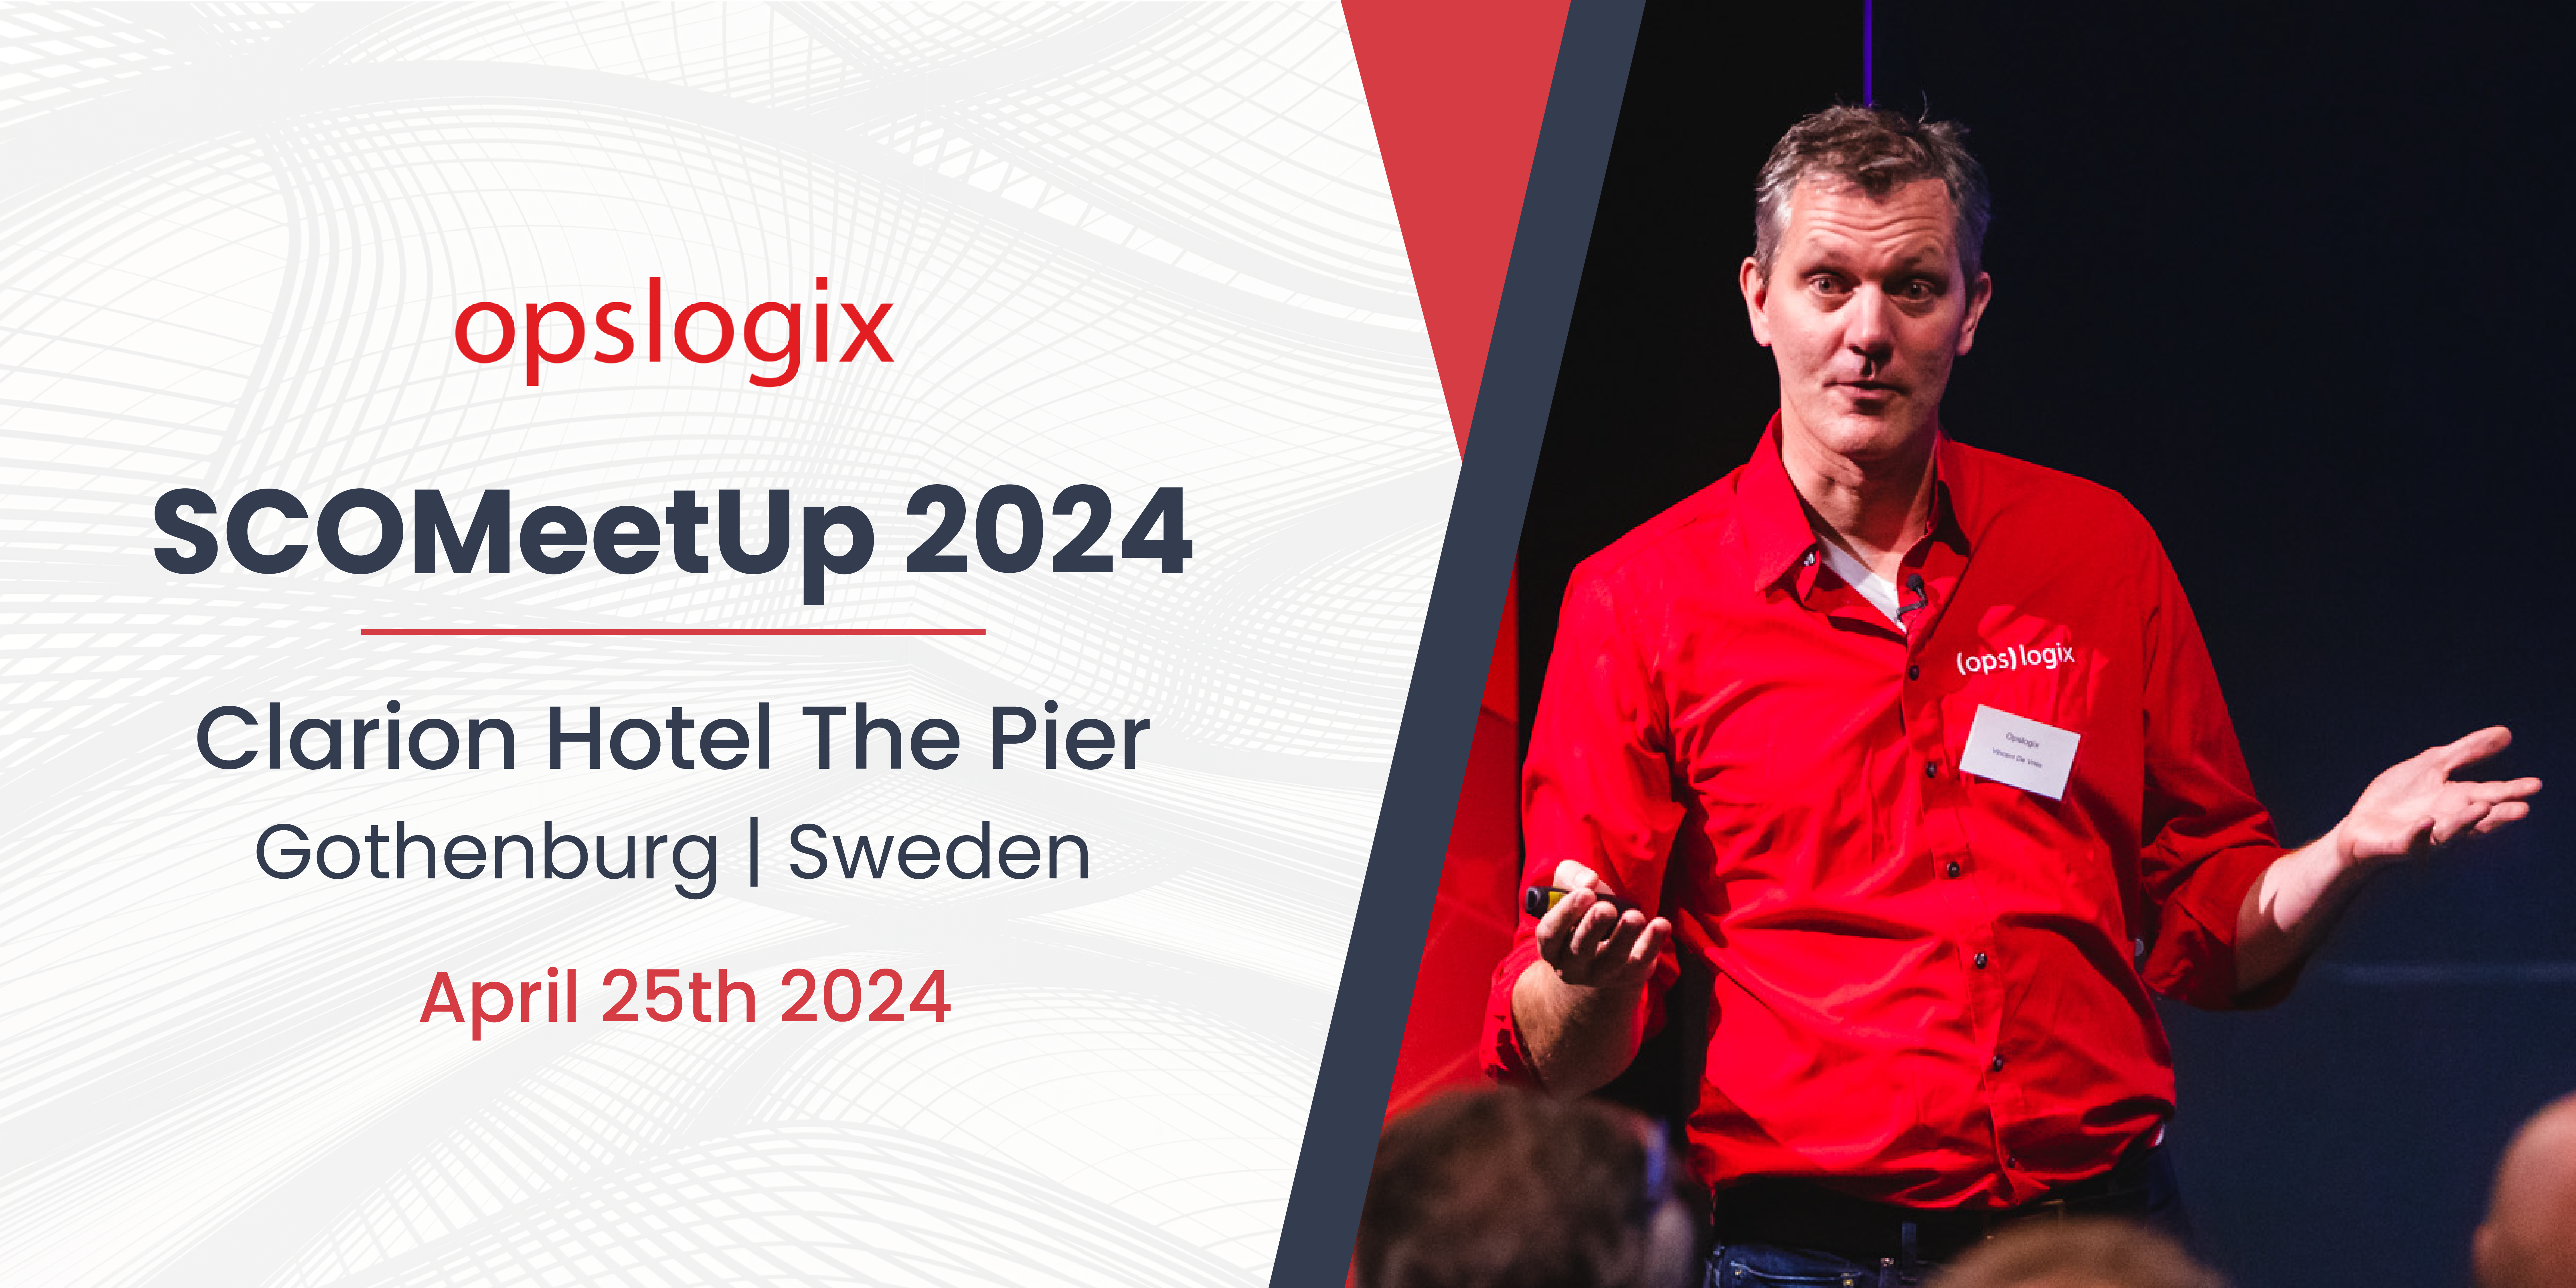 We invite you to SCOMeetUp 2024 on April 25th in Gothenburg!